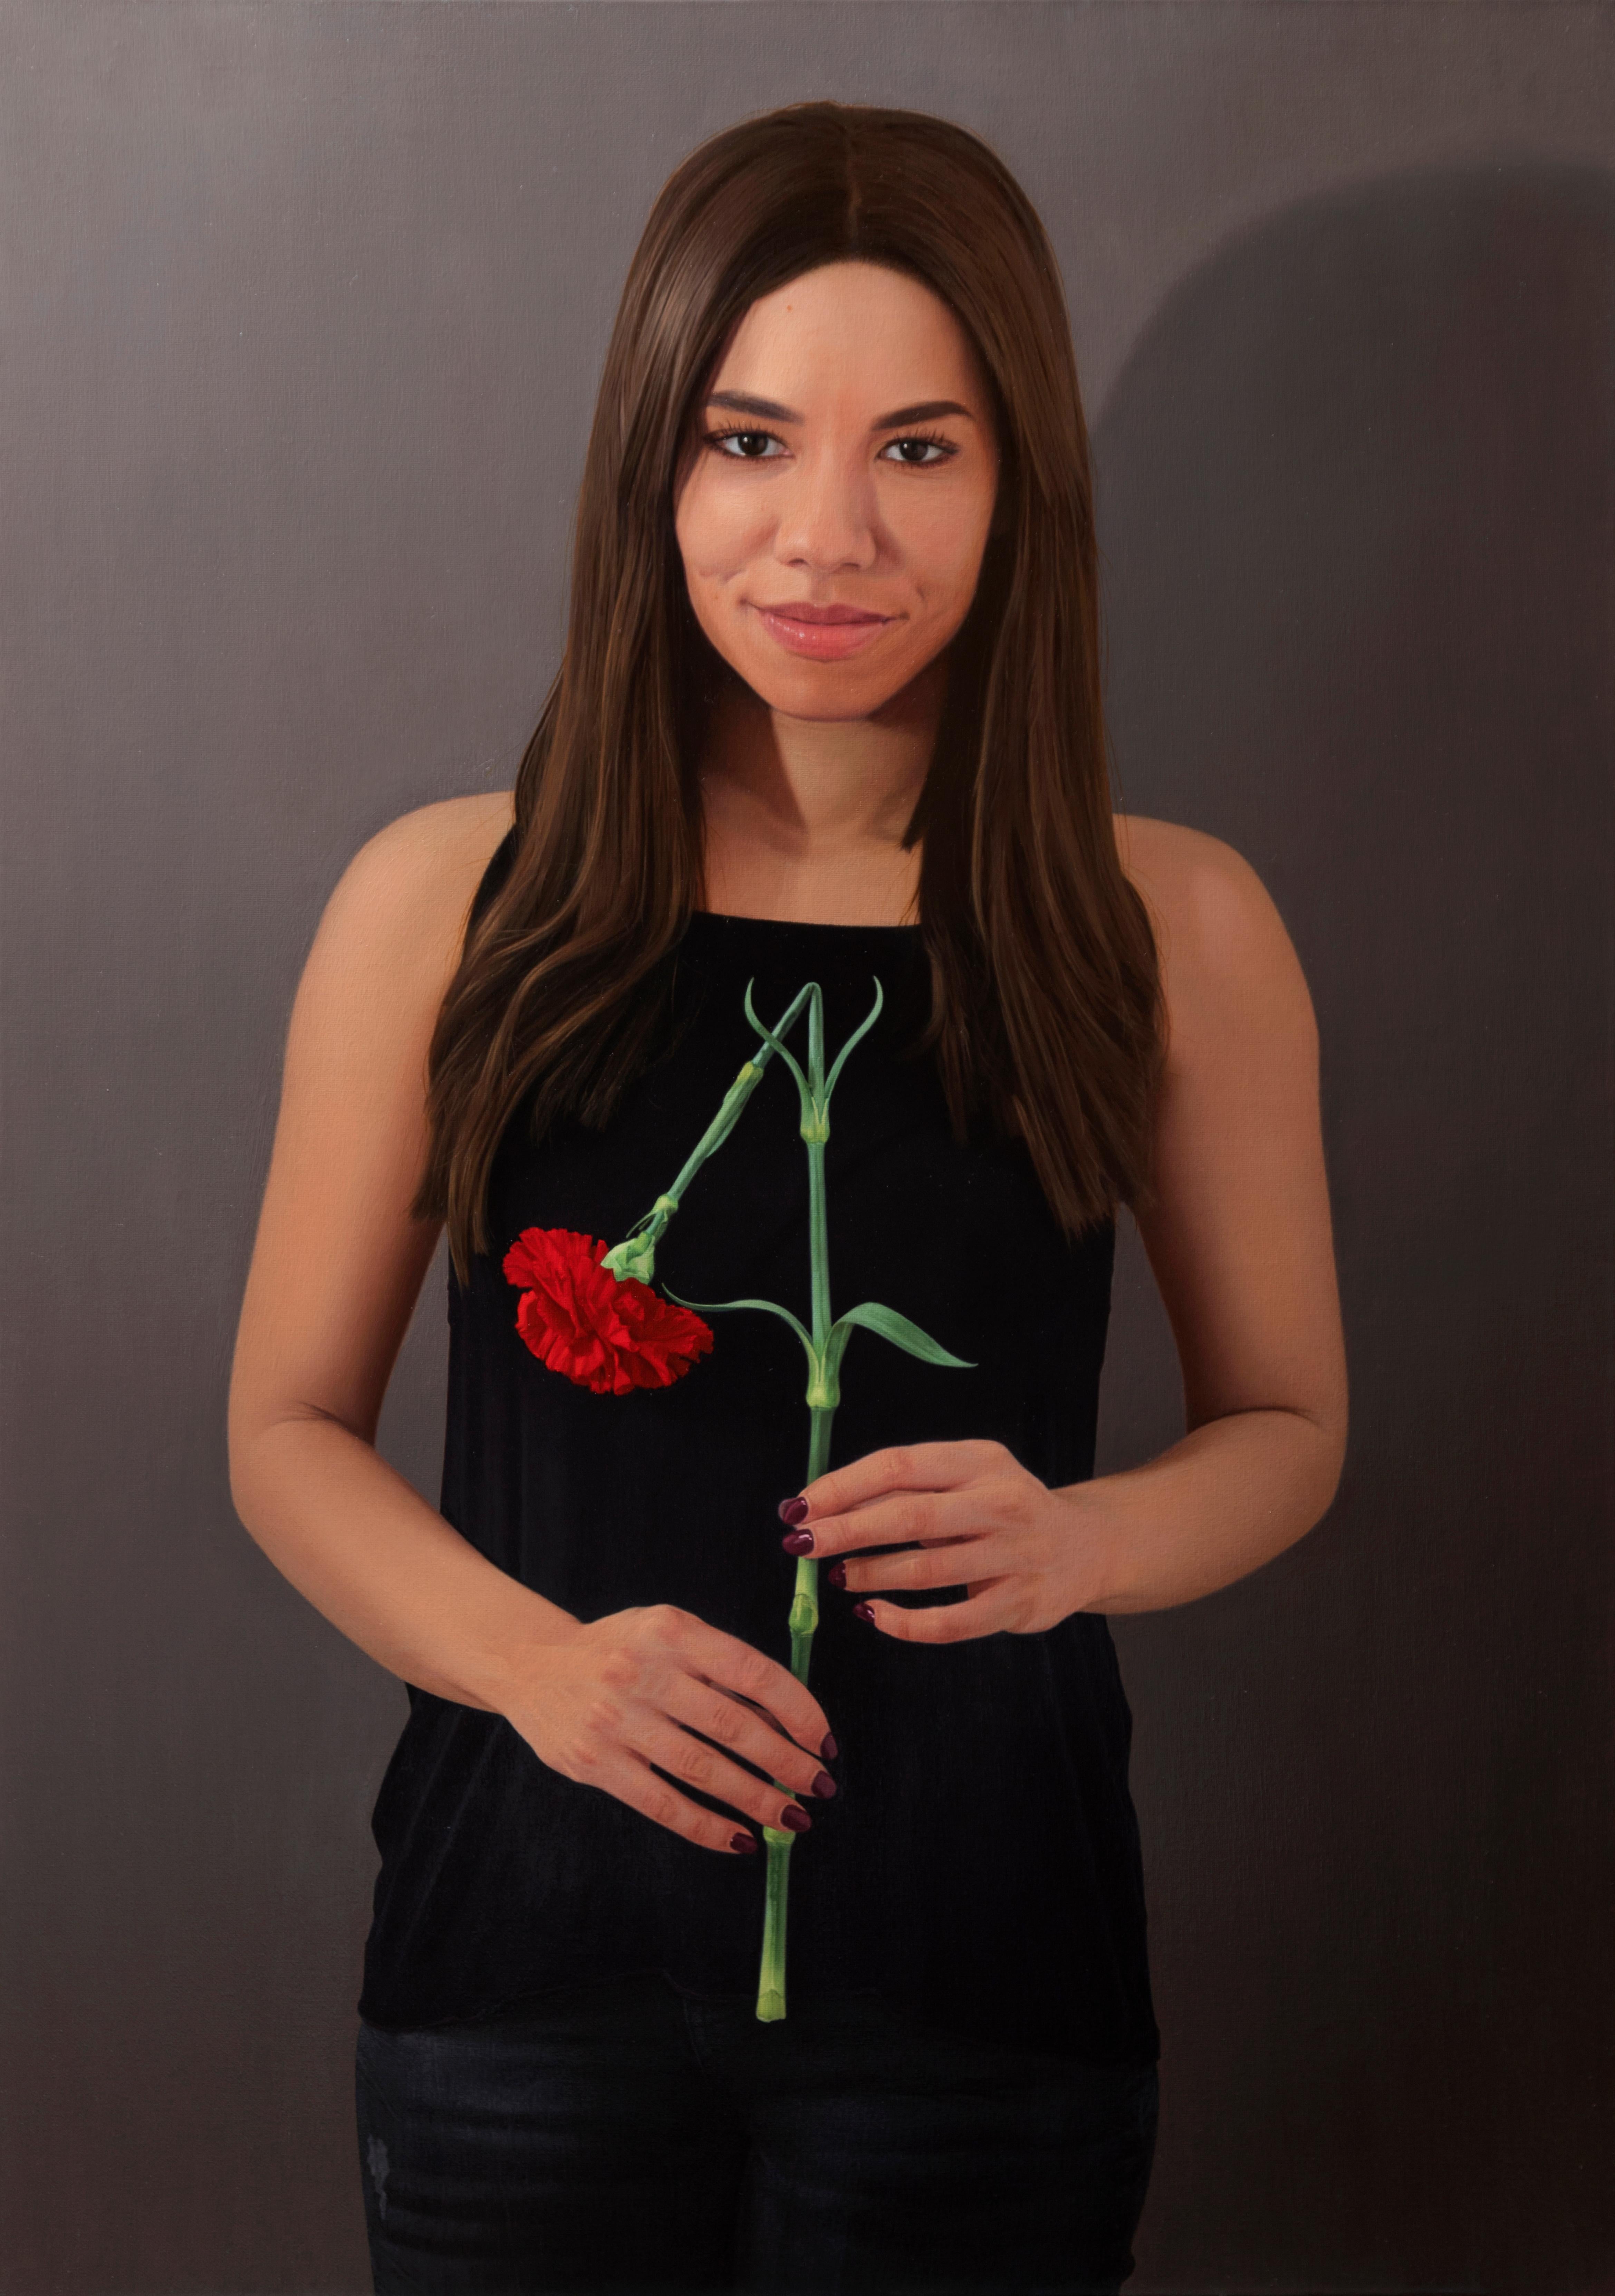 Girl With Flower - Contemporary Oil Painting, Realistic Woman Portrait